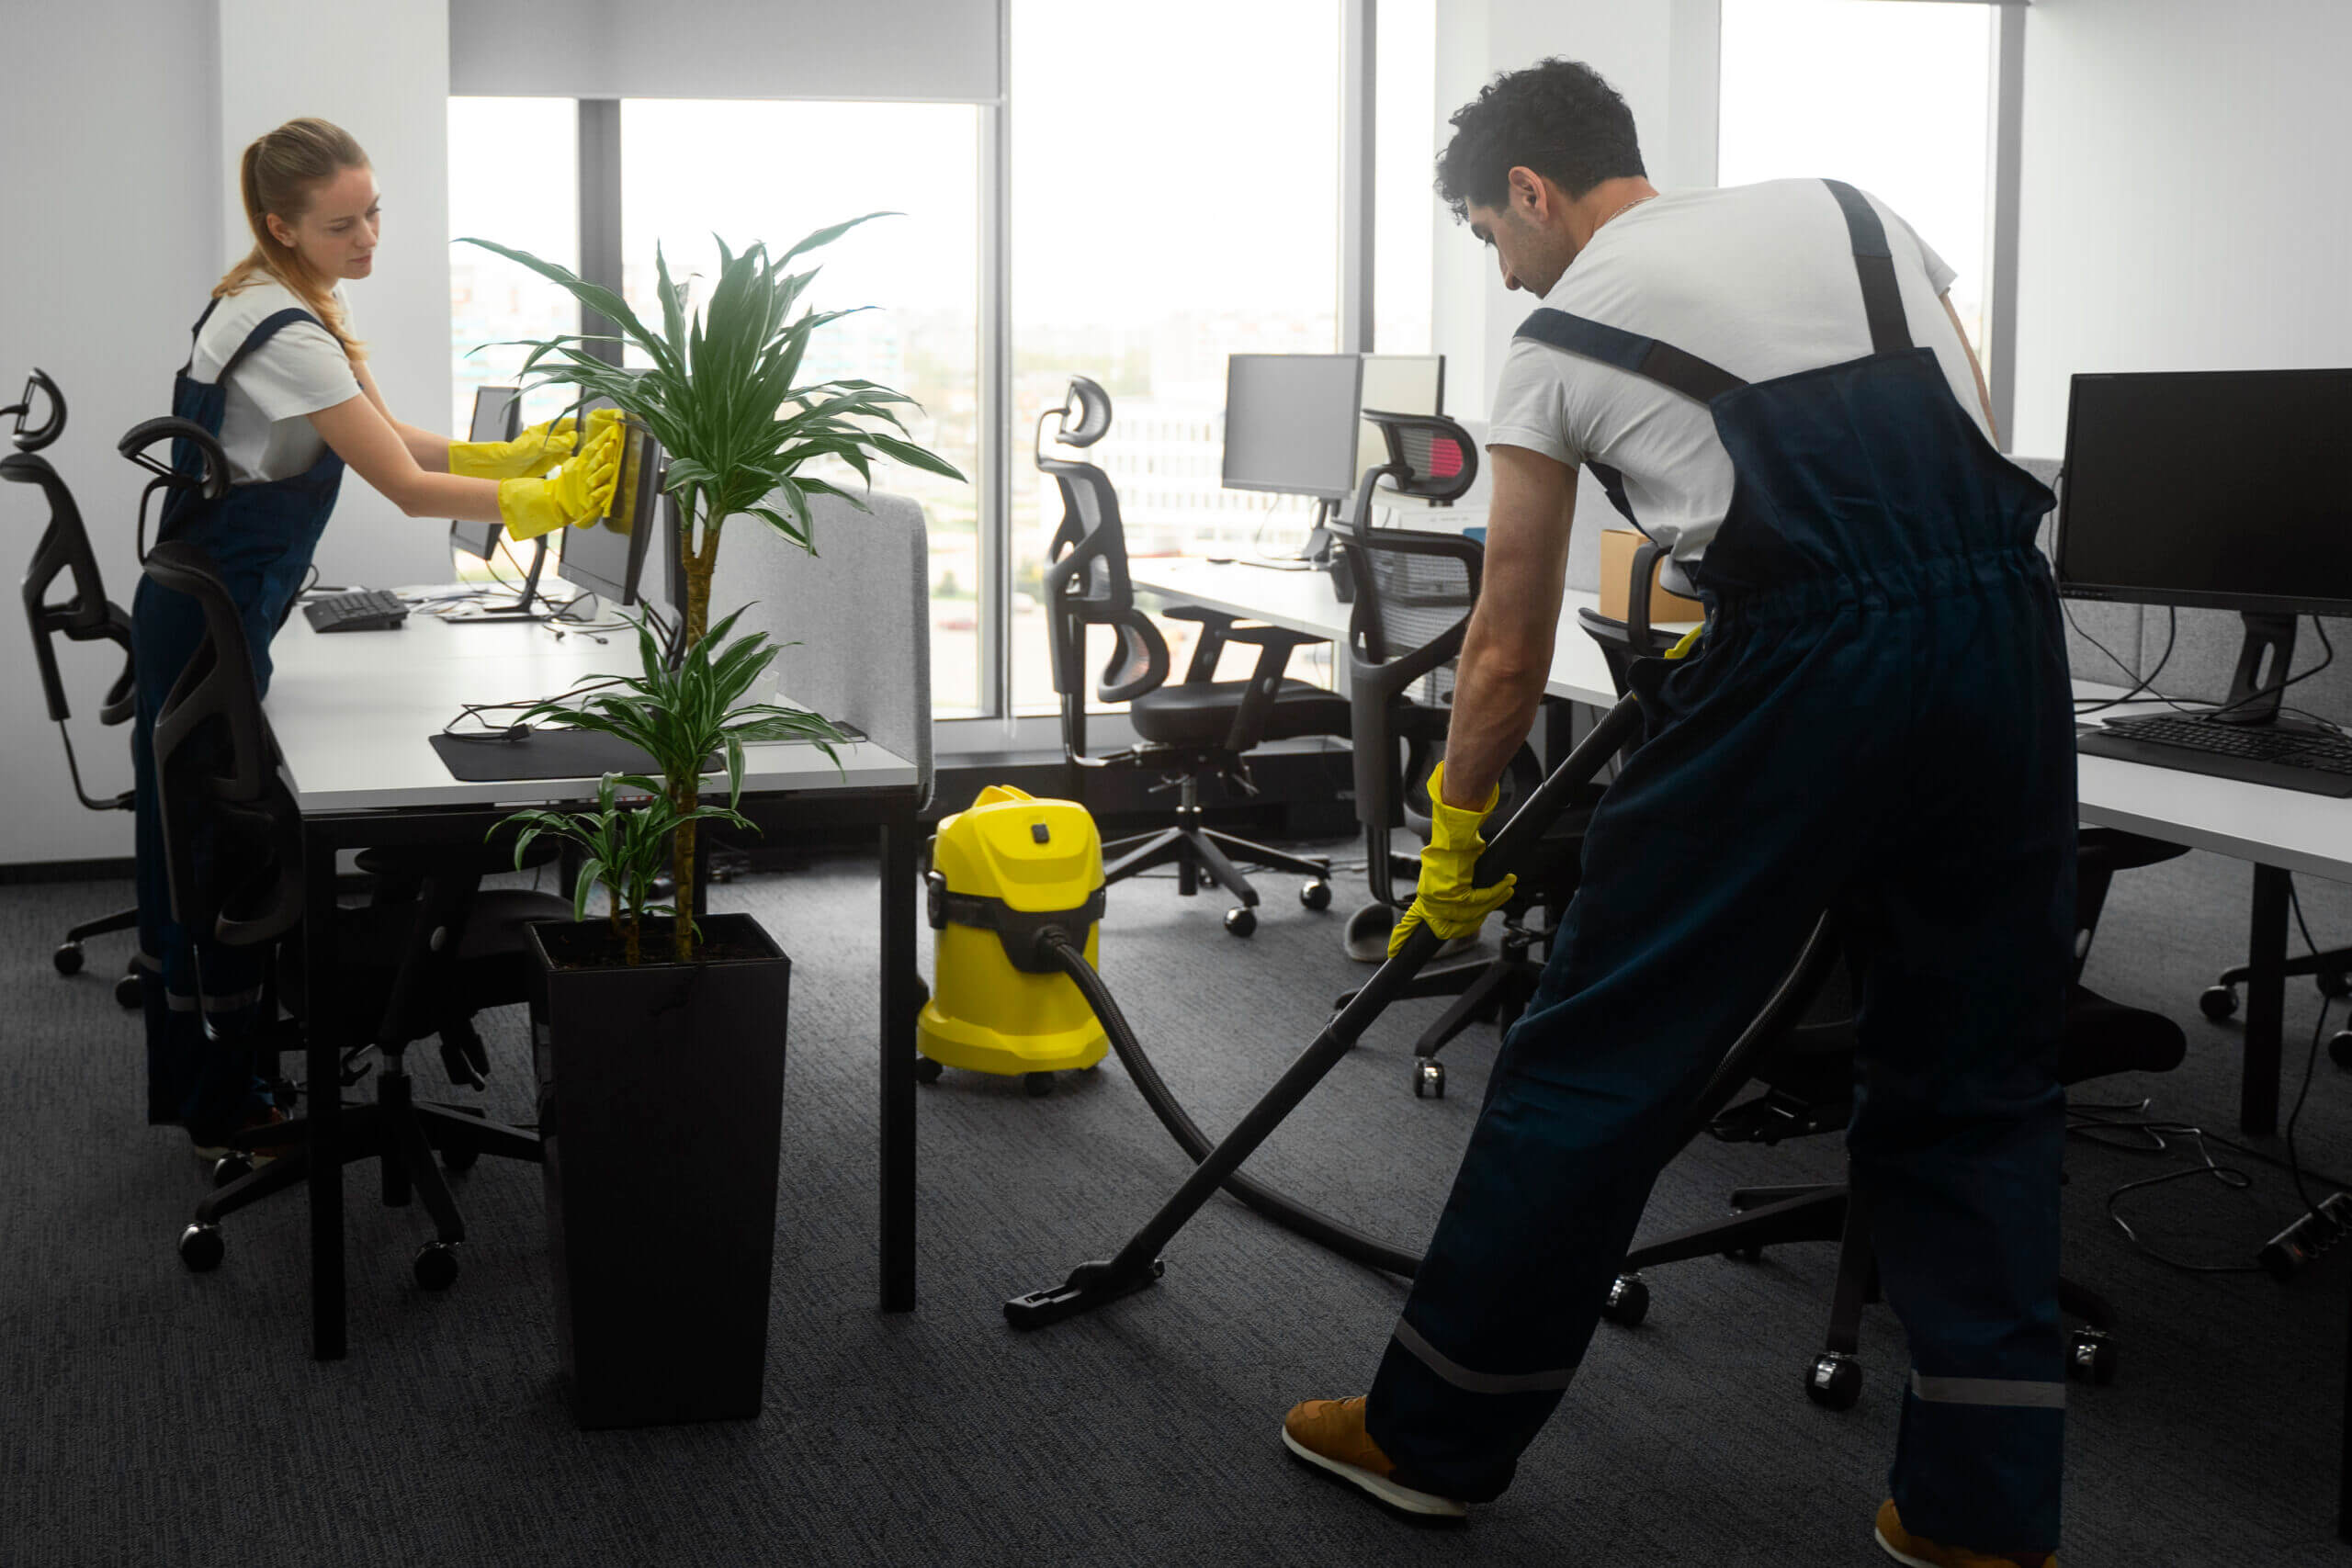 Get started with our elite commercial cleaning franchise crew